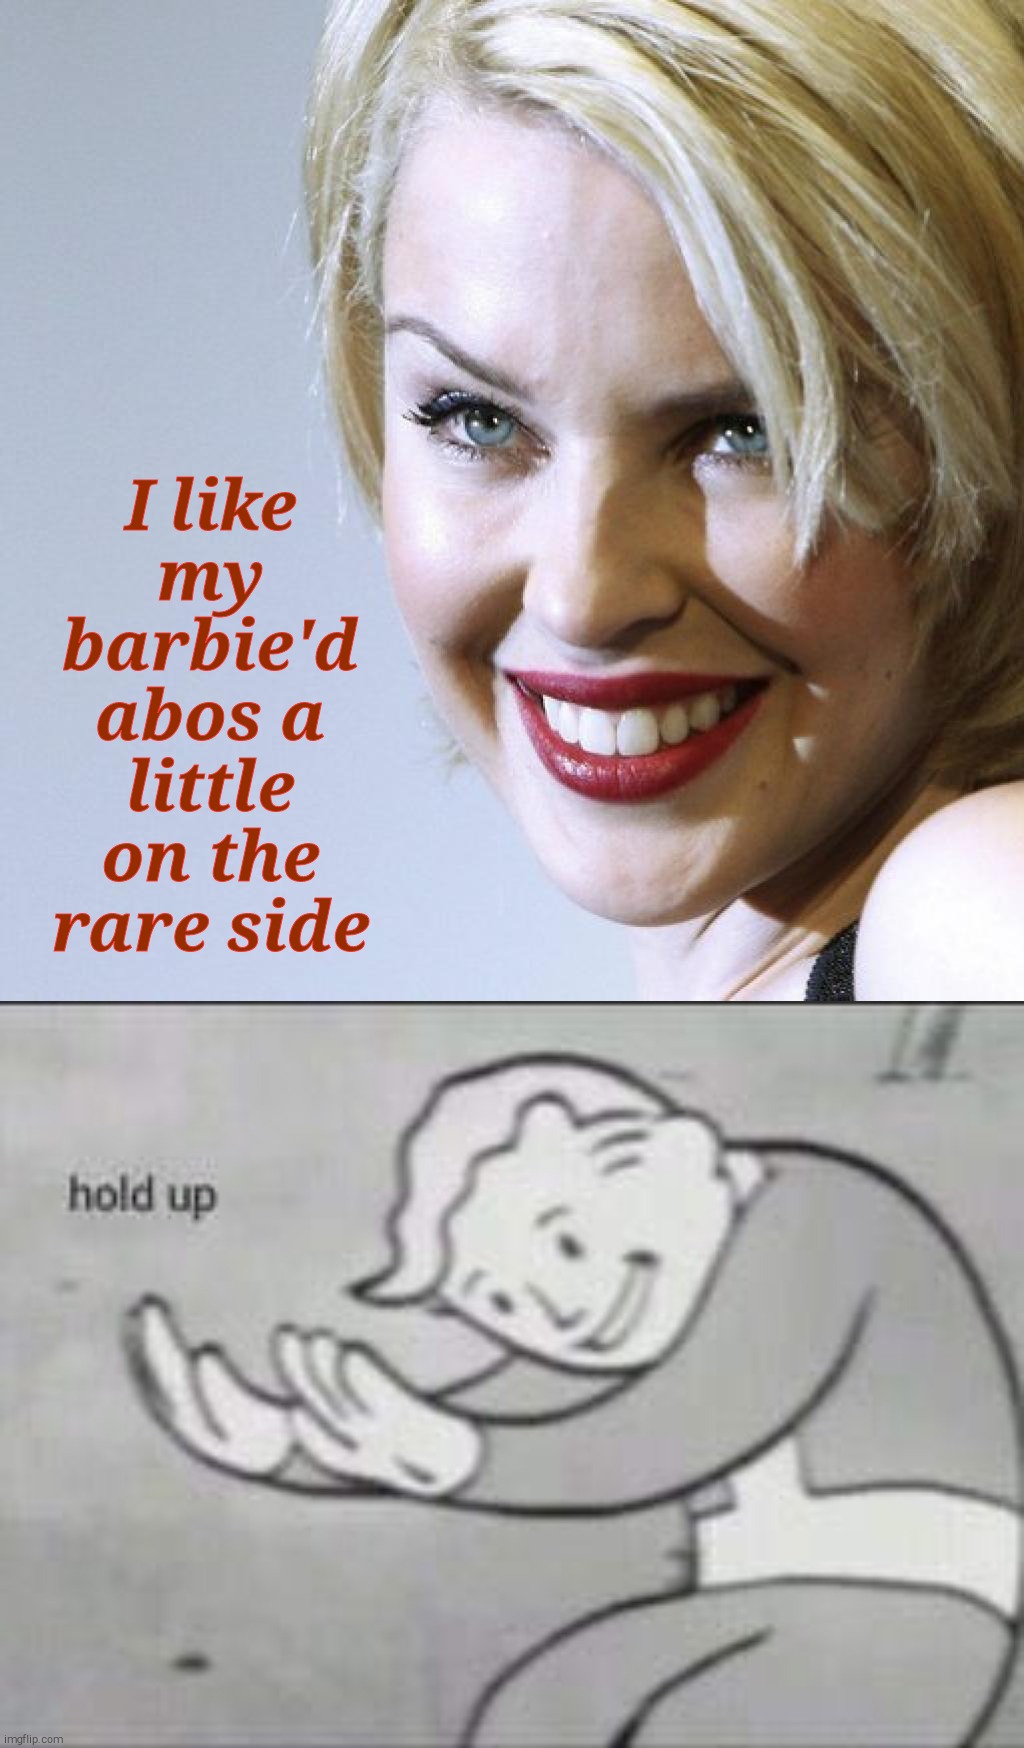 Botox won't stop Mutton Minogue's hunguh,.., | I like my barbie'd abos a little on the rare side | image tagged in fallout hold up,kylie minogue,kylie minogue aussie,kylie minogue botox cracking,kylieminoguesucks | made w/ Imgflip meme maker